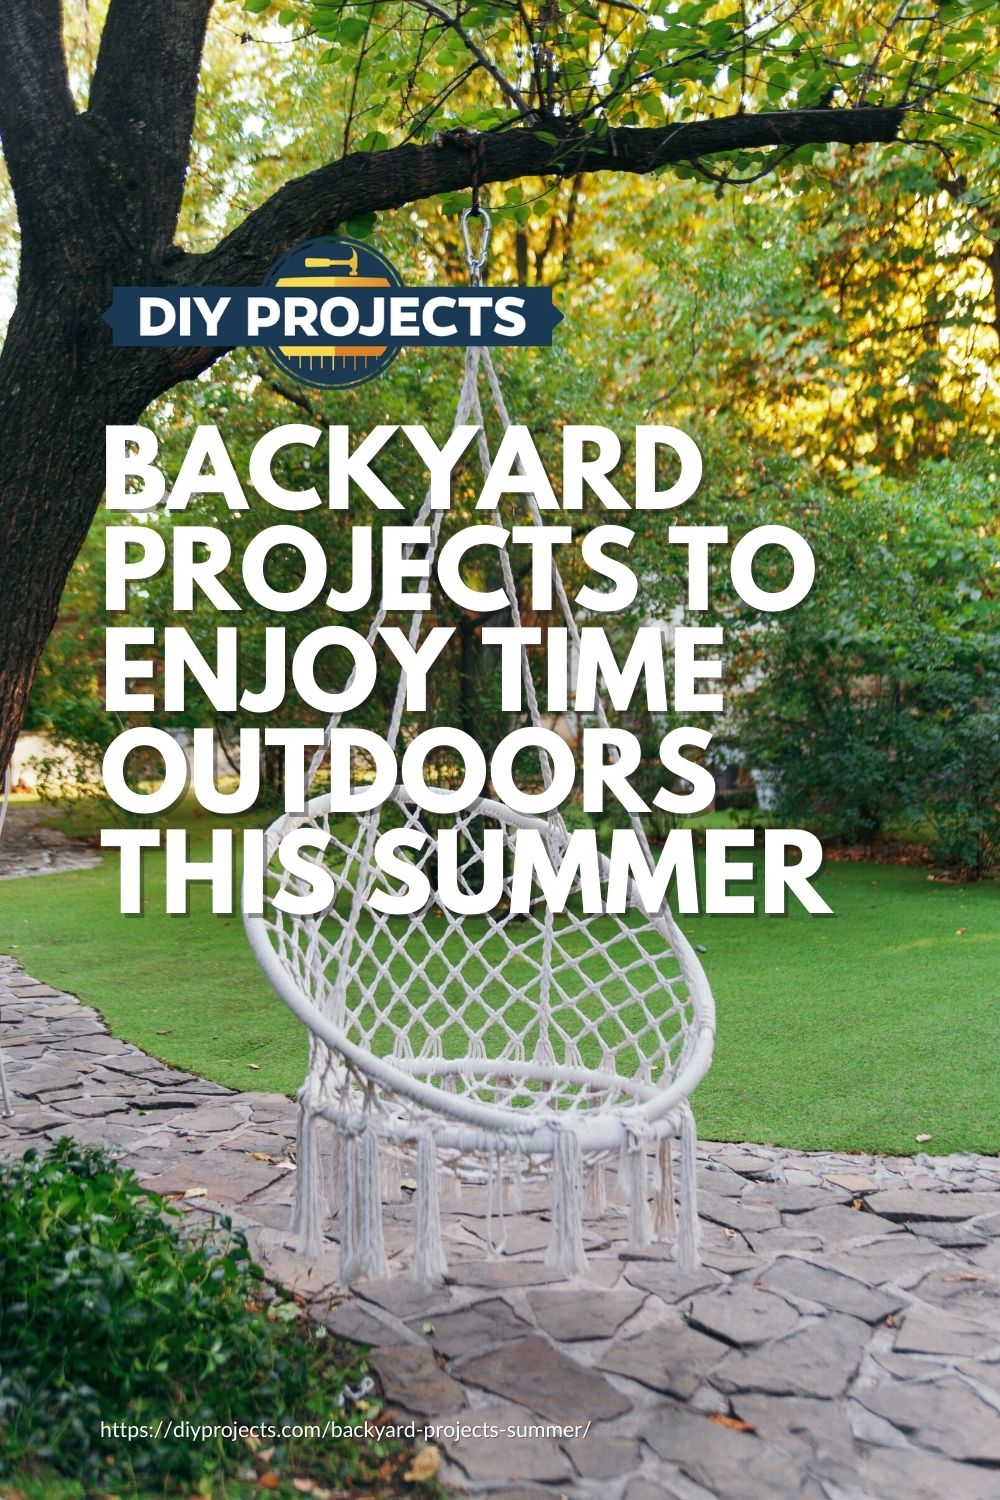 Backyard Projects To Enjoy Time Outdoors This Summer | Placard